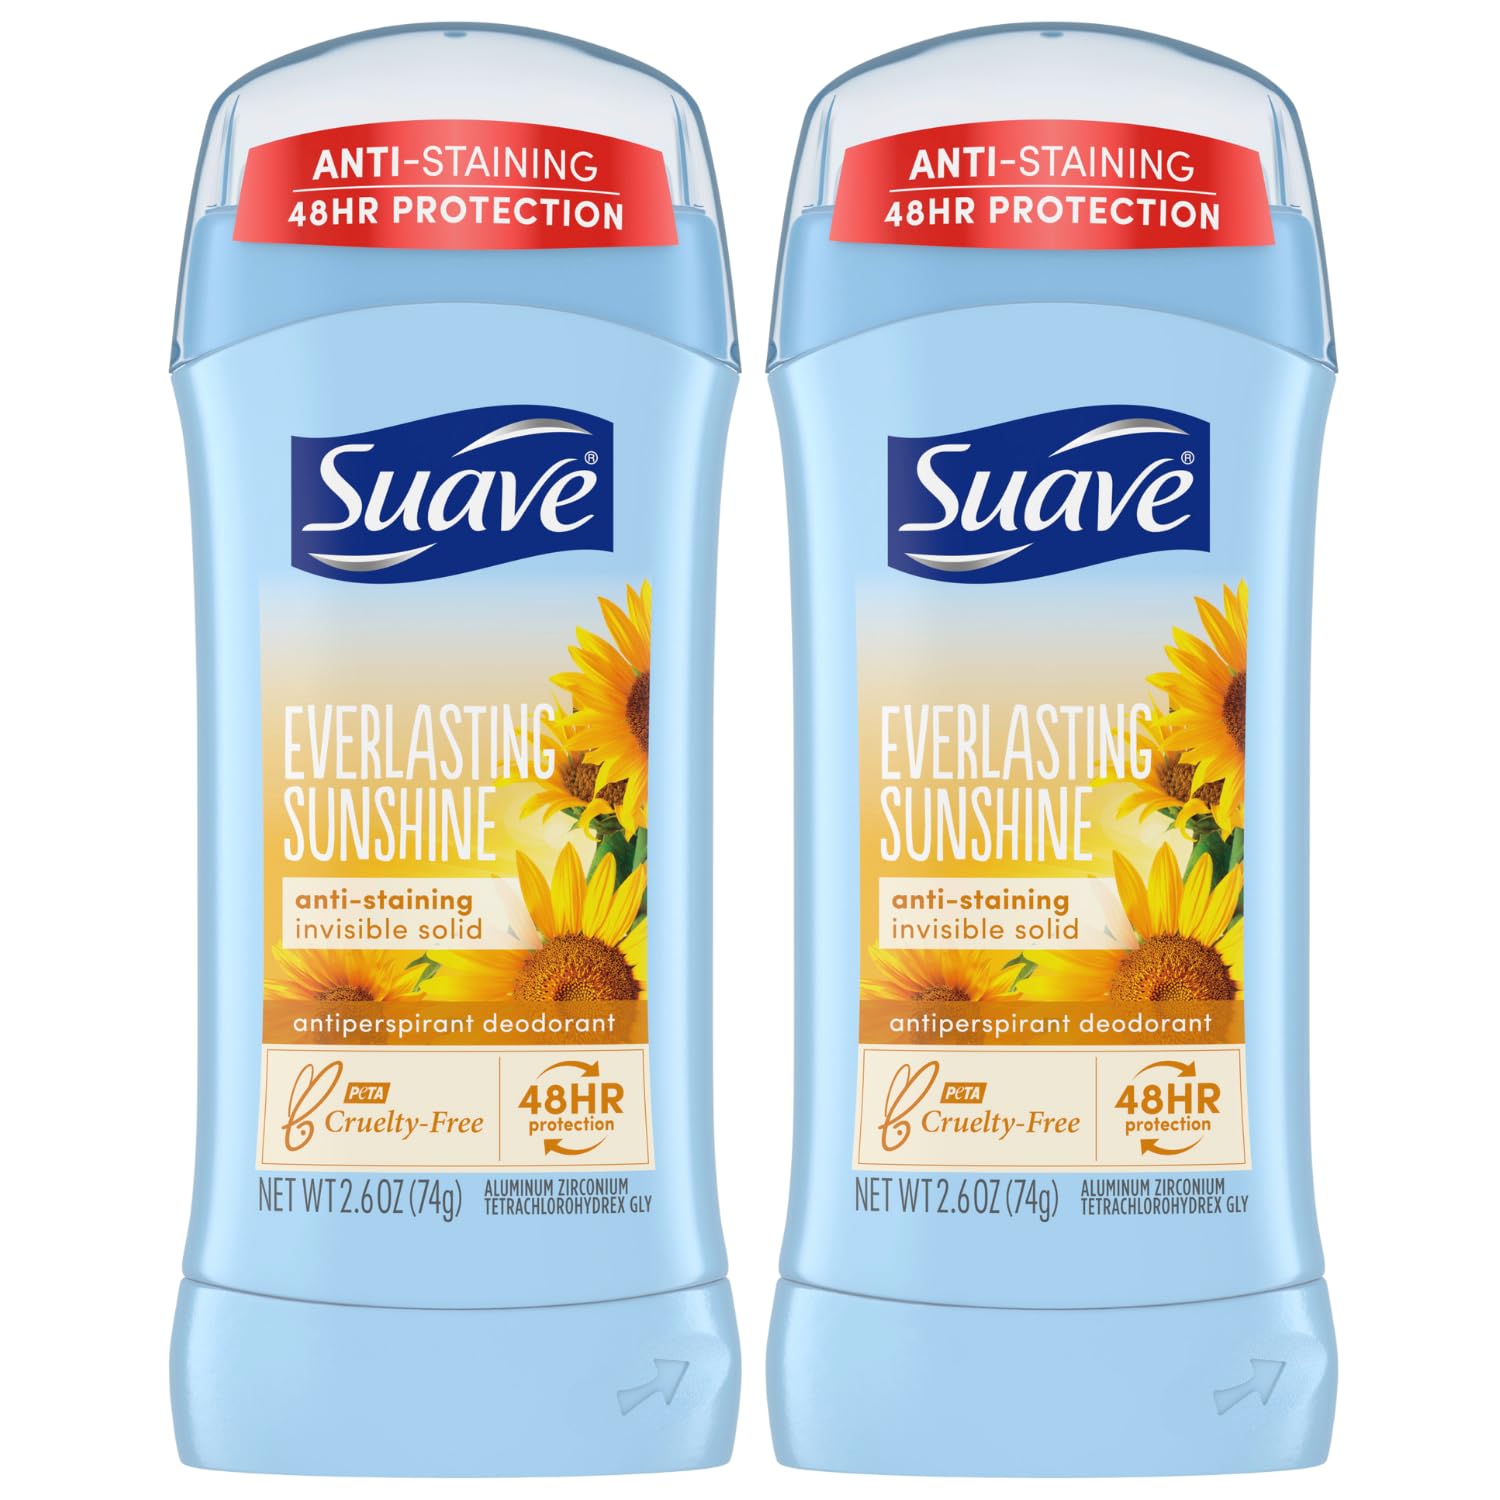 Suave Deodorant for Women, Everlasting Sunshine – Invisible Solid Antiperspirant Deodorant Stick, 48H Protection, Anti-Staining, Cruelty-Free, Scented, 2.6 Oz (Pack of 2)